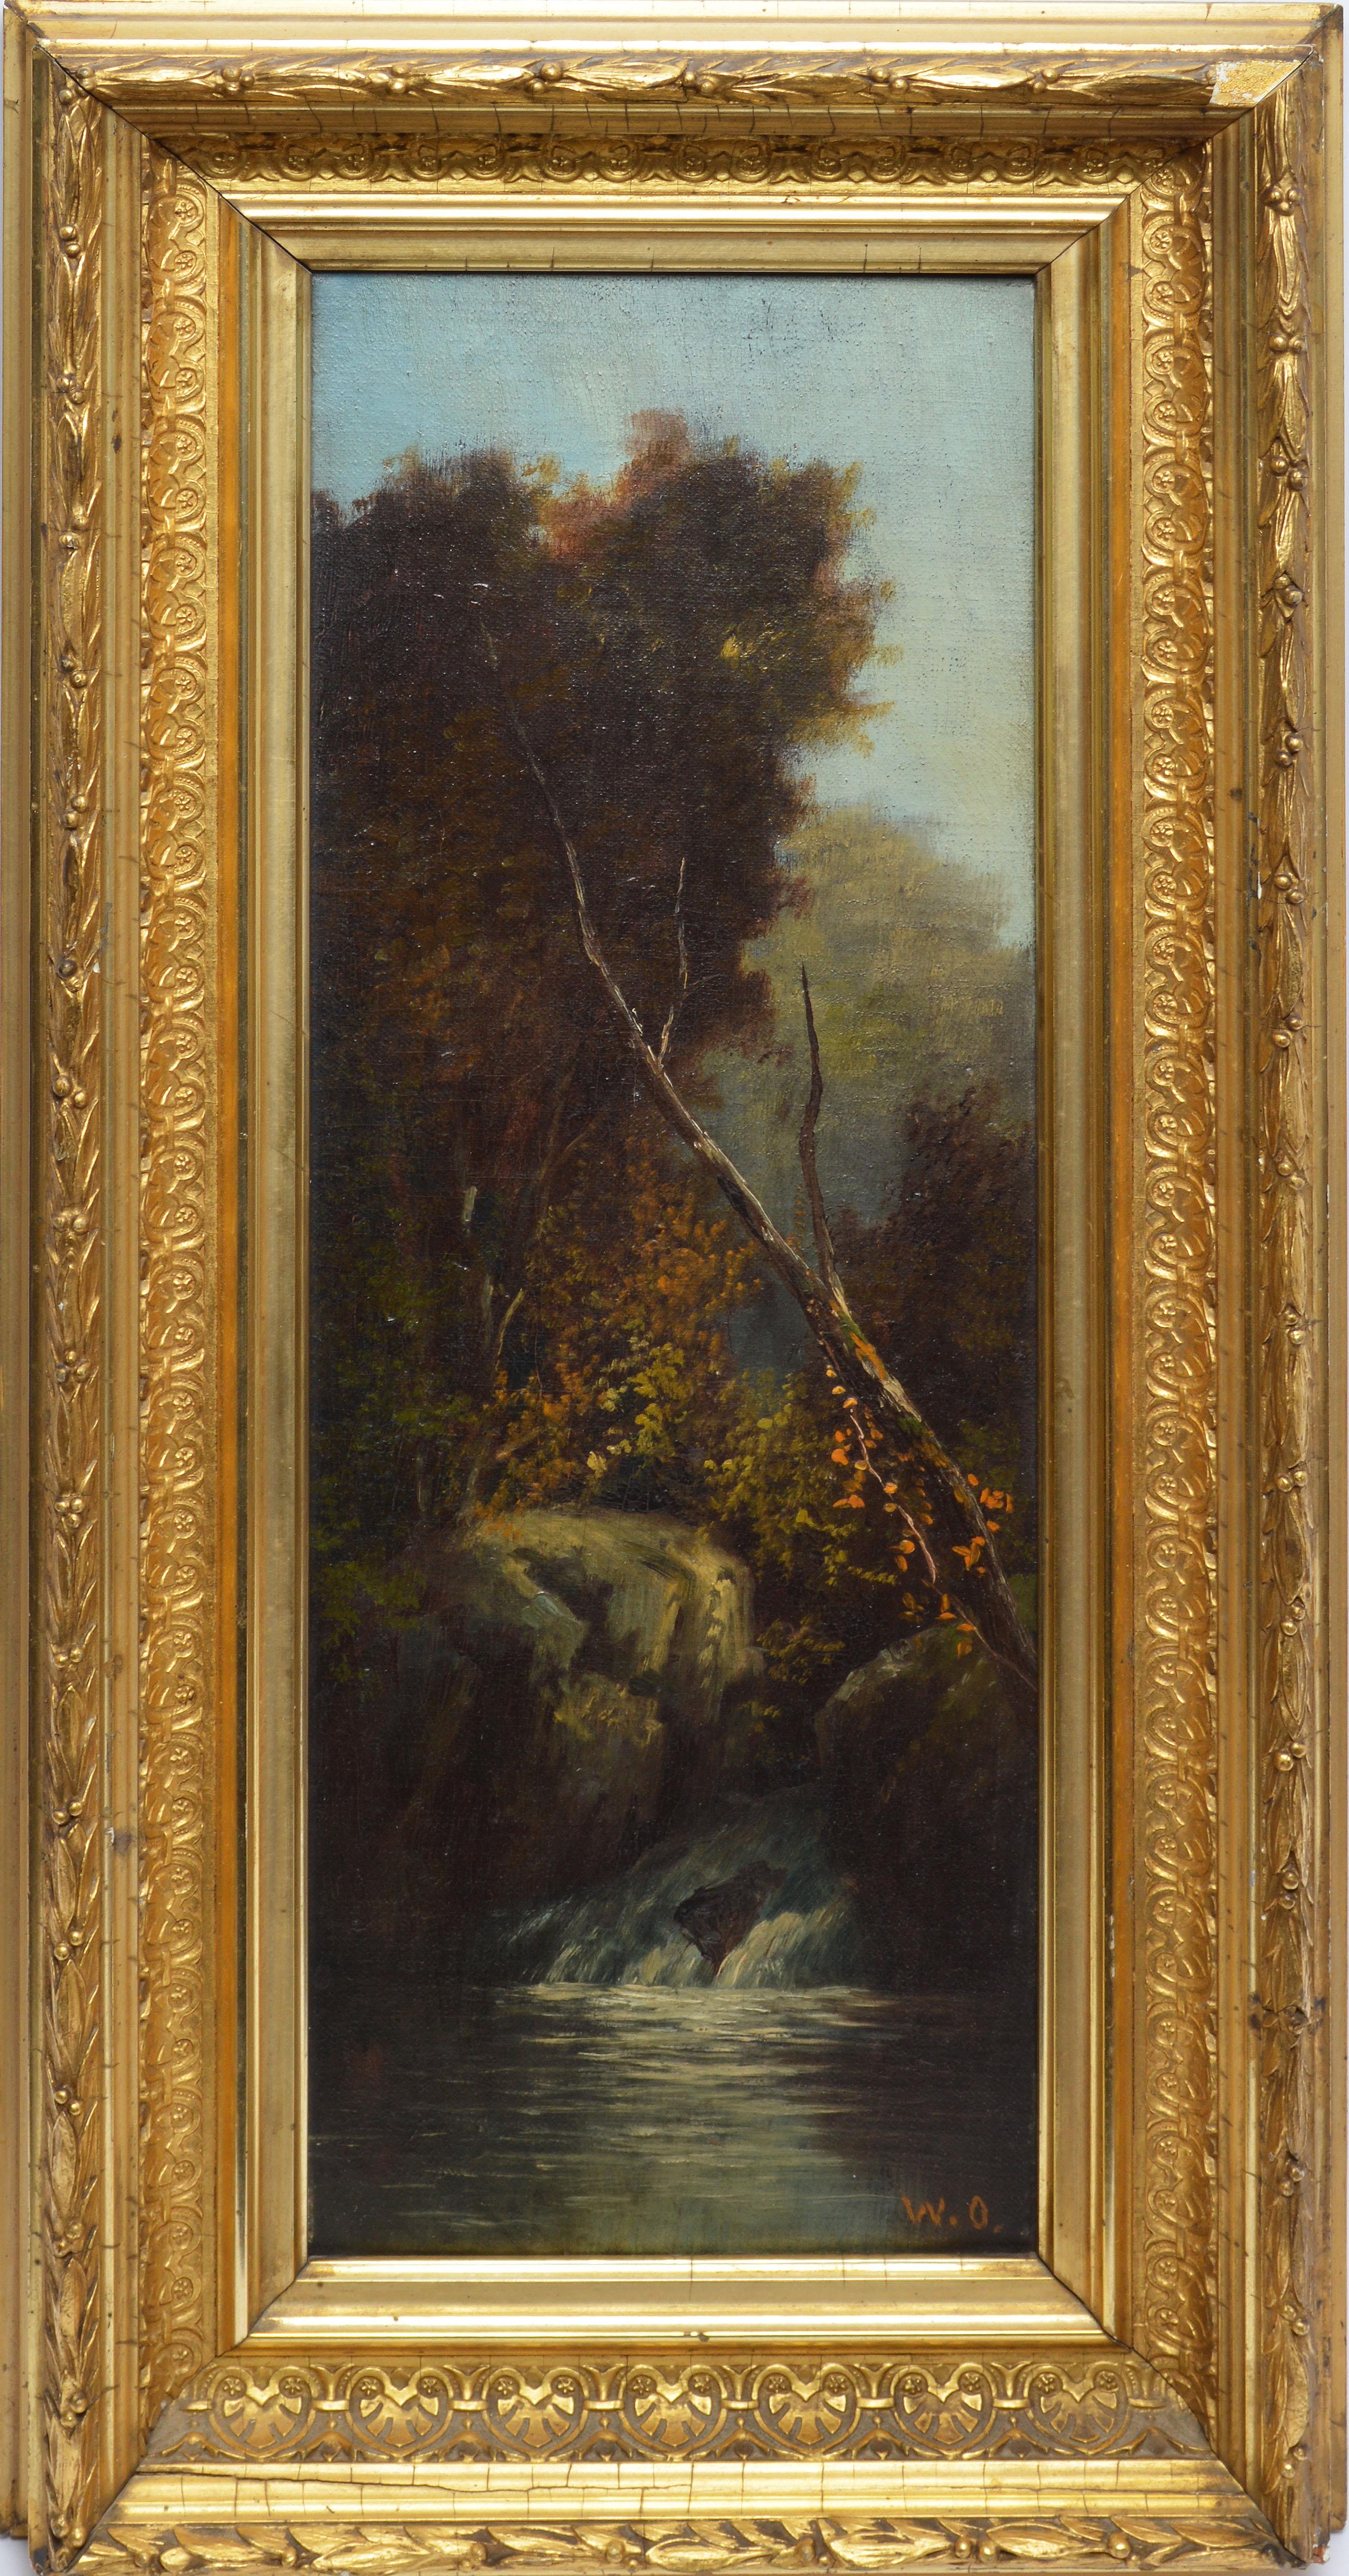 Antique American Hudson River School painting of a waterfall by William Ongley  (1836 - 1890).  Oil on canvas, circa 1870. Signed in monogram.  Displayed in a period giltwood frame.  Image, 6"L x 18"H, overall 11"L x 23"H.